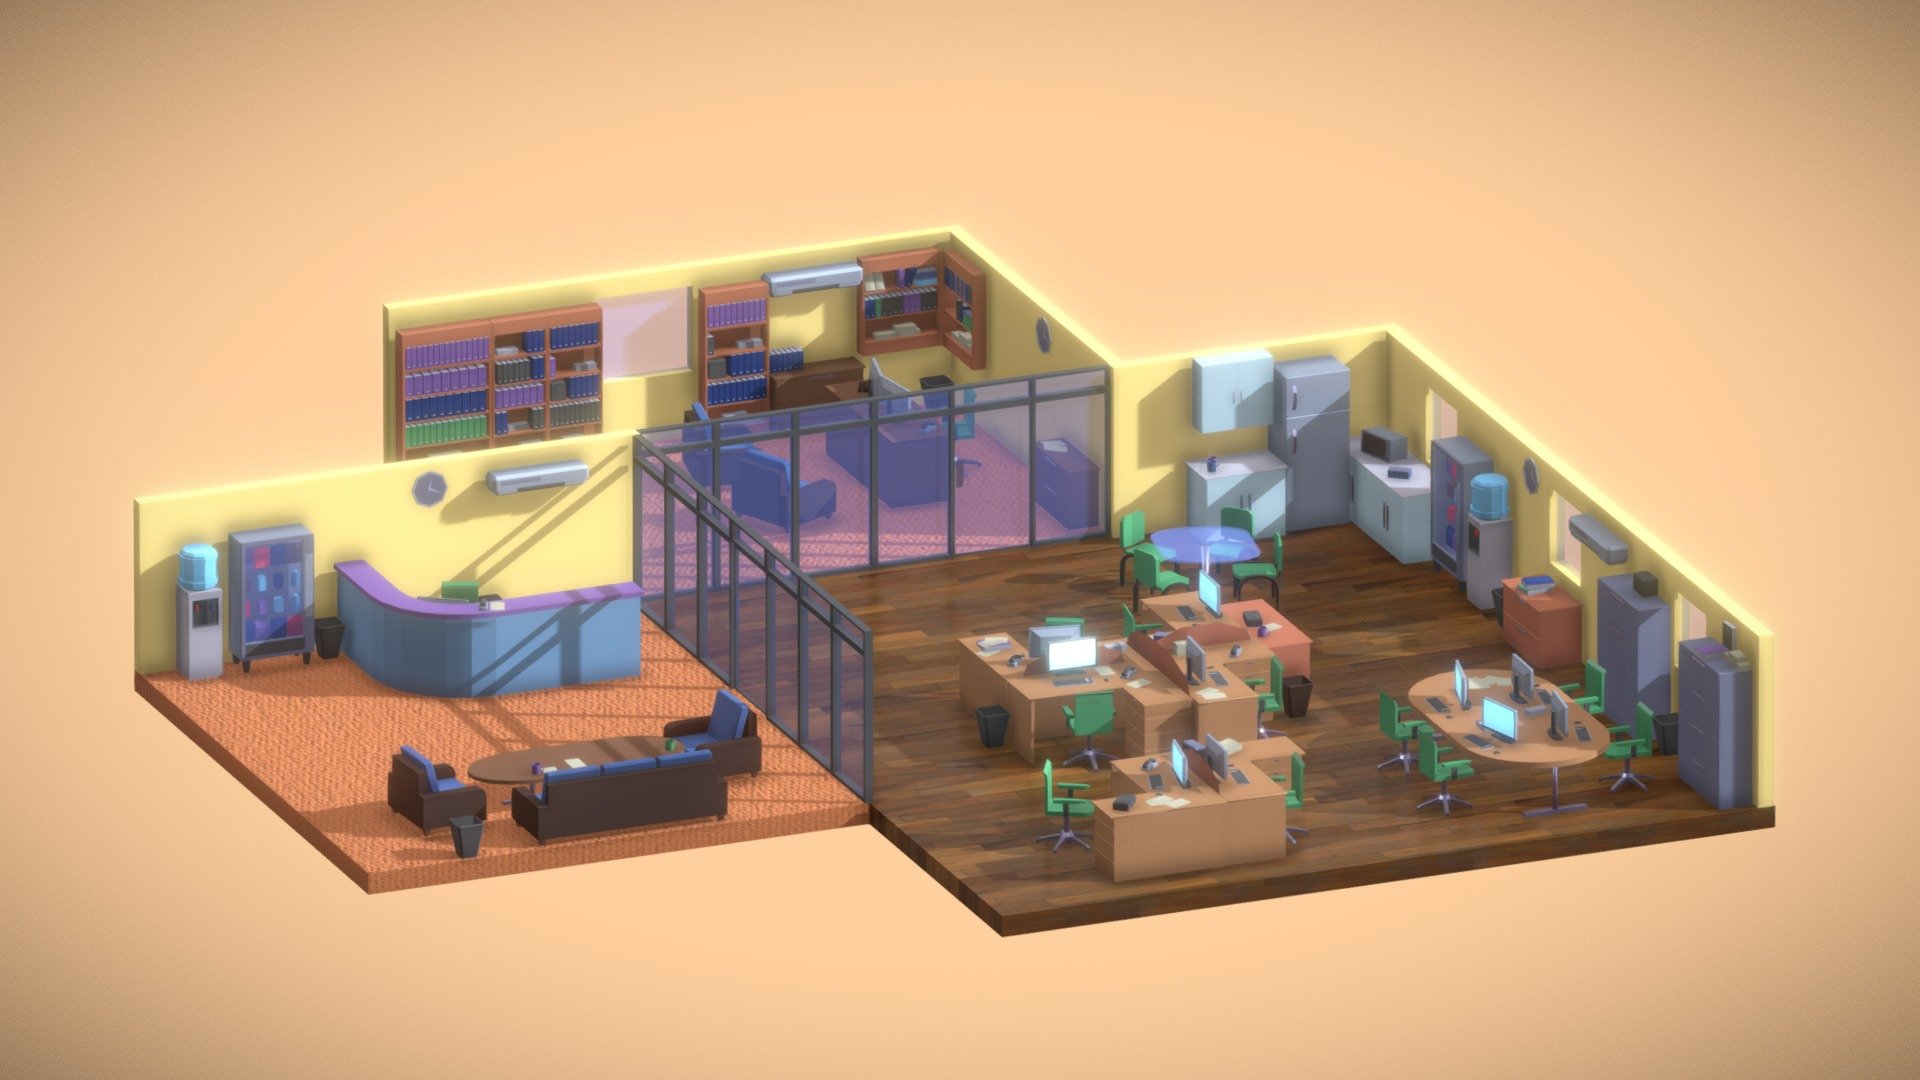 Low-poly isometric office environment scene. Everything is made by me exclusivly in Blender(except 2 textures).

You can check out renders of this and other models on my porfolio here: https://www.artstation.com/artwork/wJ46mg - Office 2 - 3D model by Companion_Cube 3d model